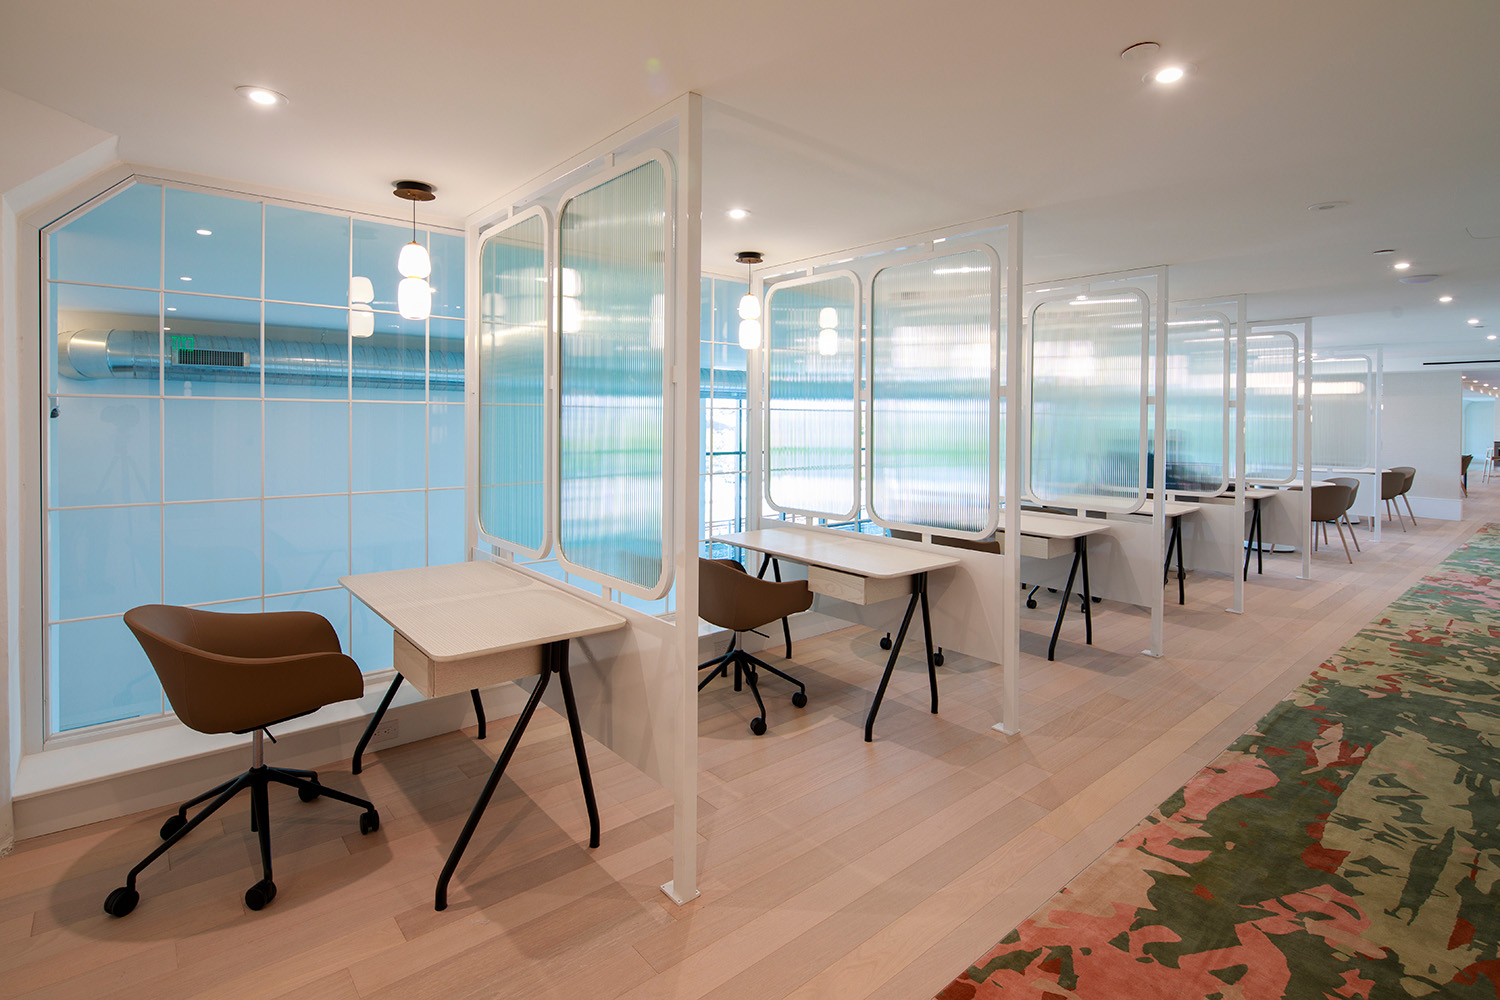 Co-working space with workstations that have semi-opaque glass dividers